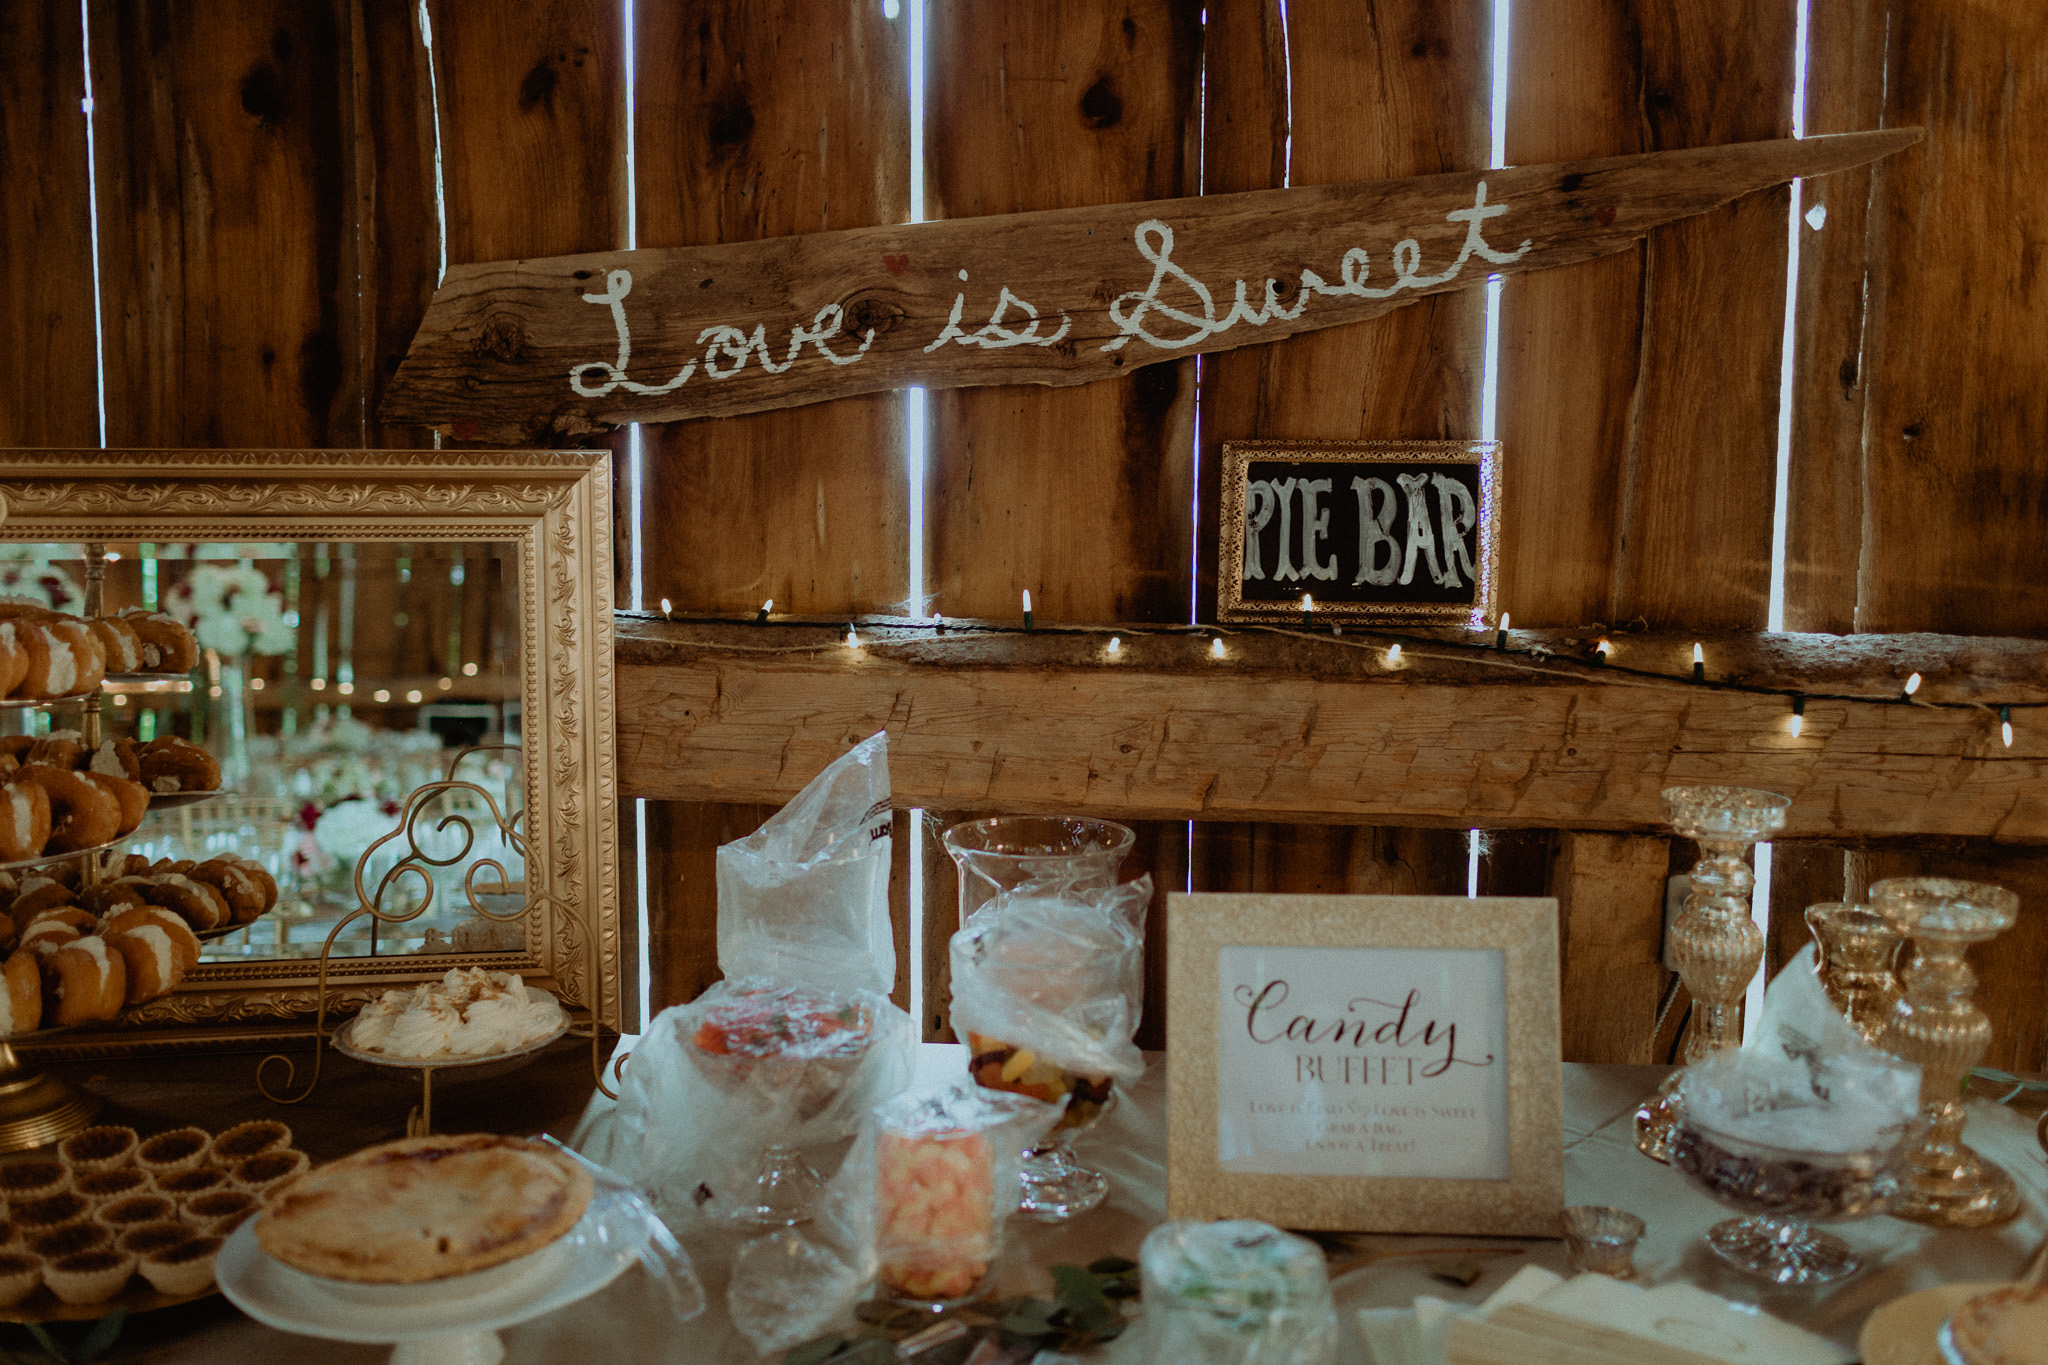 Love is sweet sign at candy bar in century barn wedding venue reception space